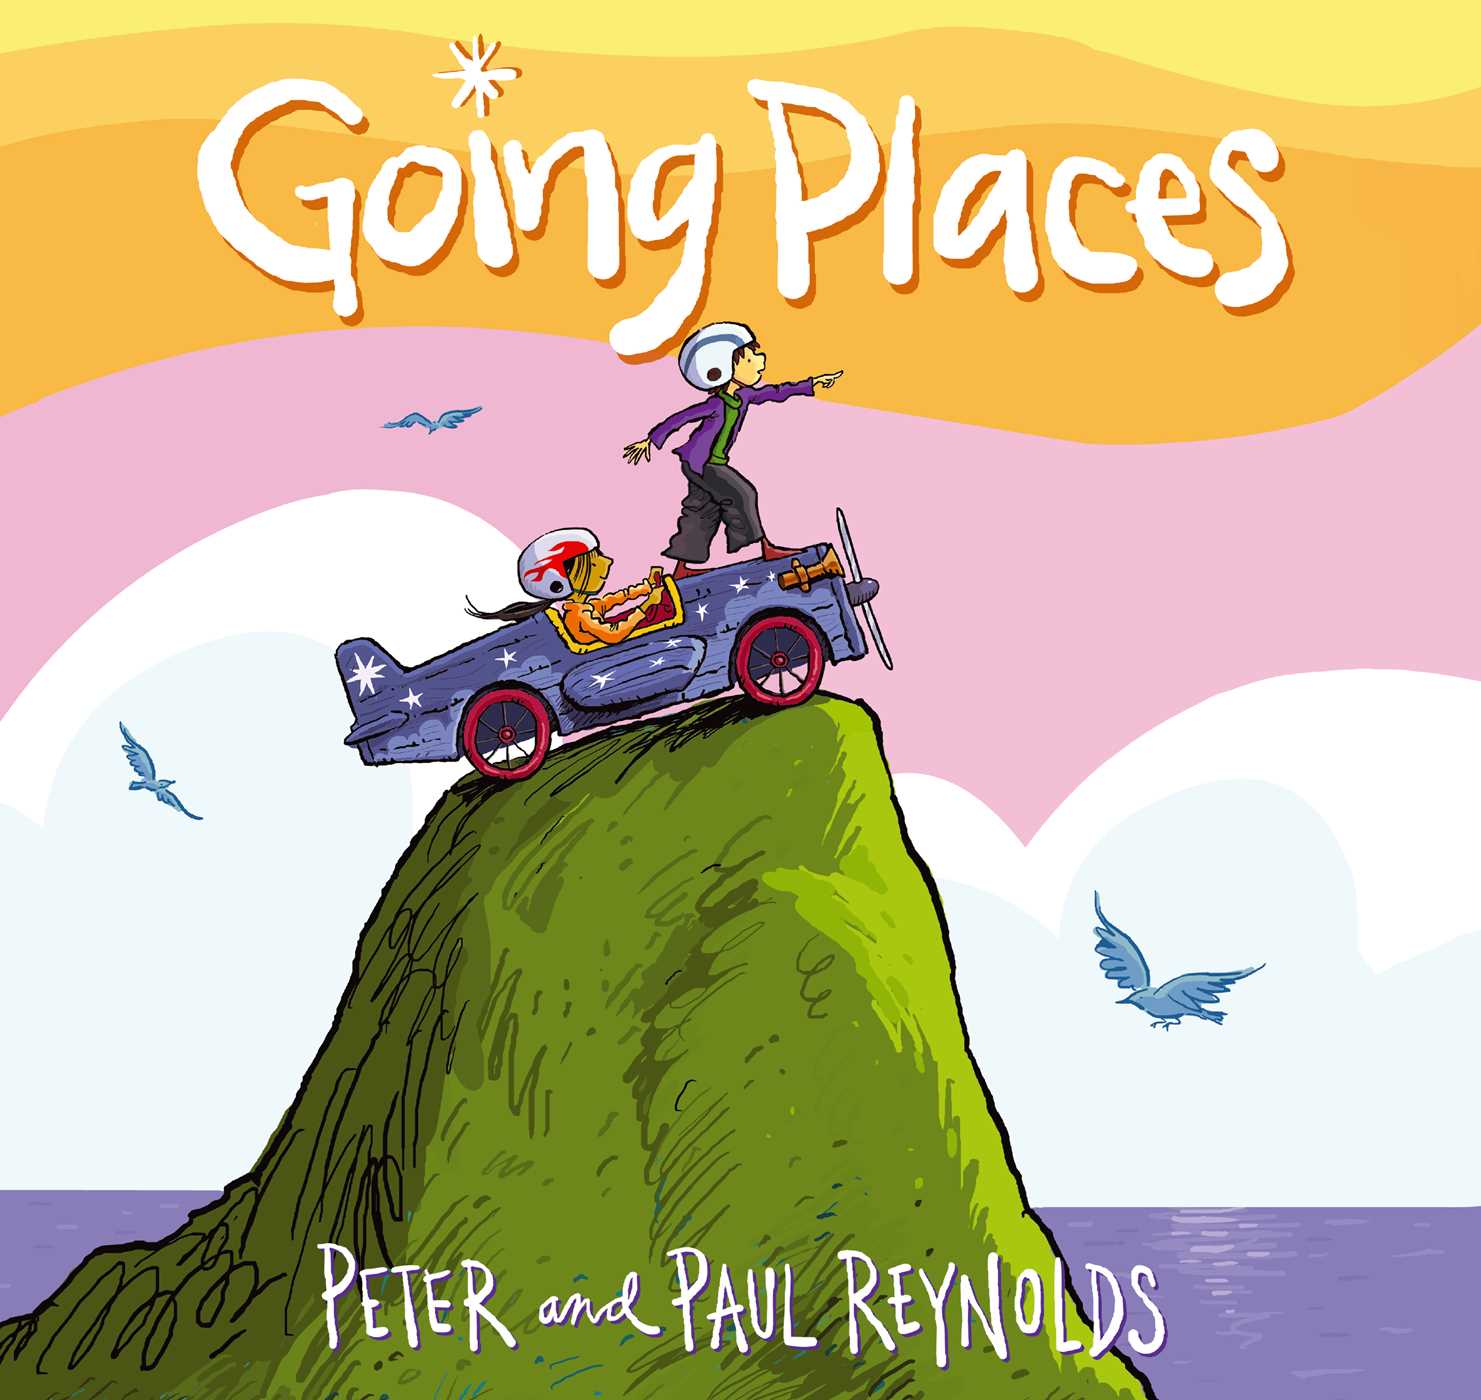 going-places-9781442466098_hr.jpg